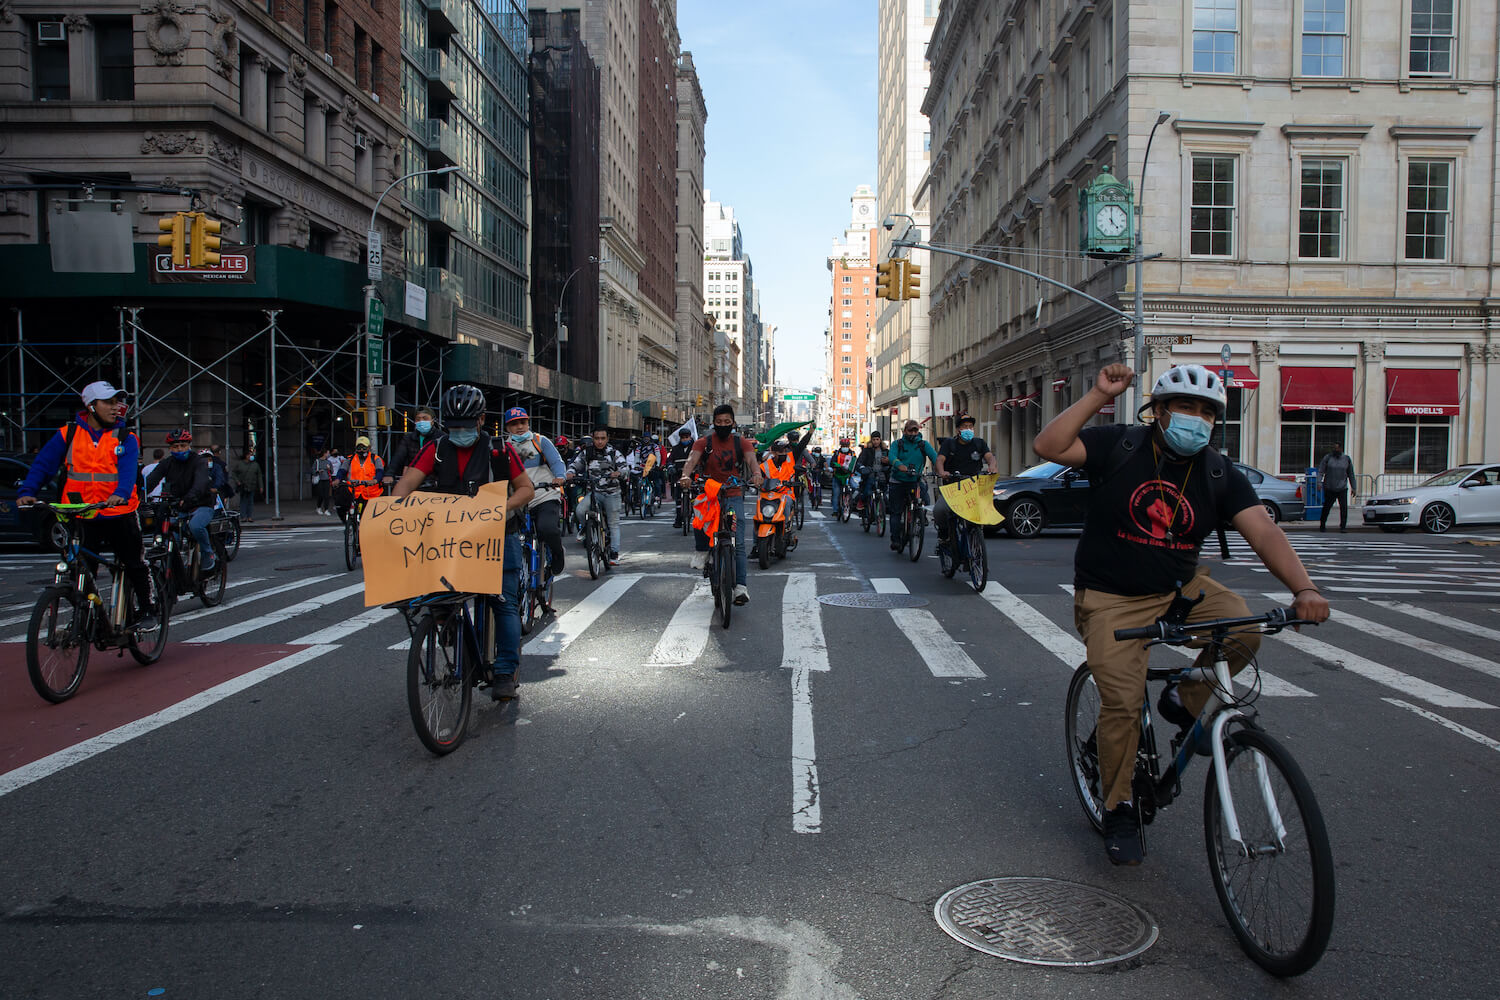 Delivery cyclists rode down Broadway in October 2020 to protest a lack of protection during the coronavirus pandemic. September 2021